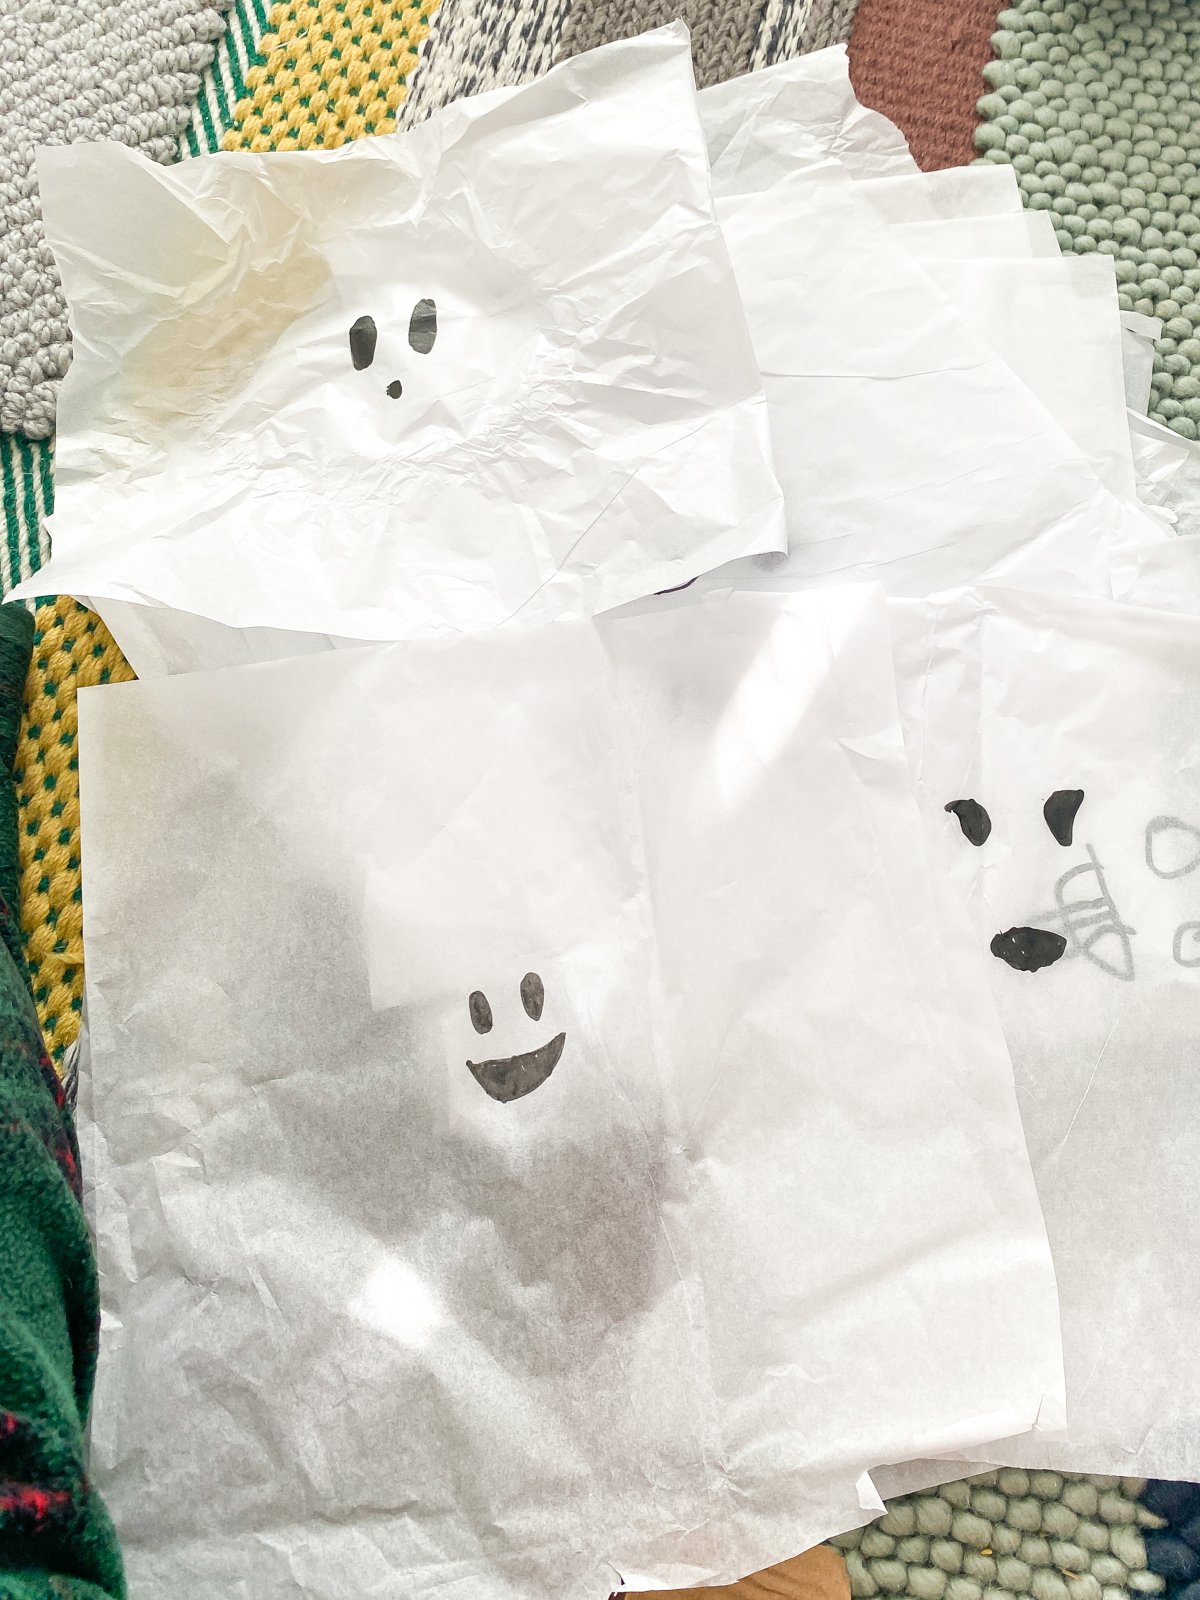 ghost faces drawn on tissue paper